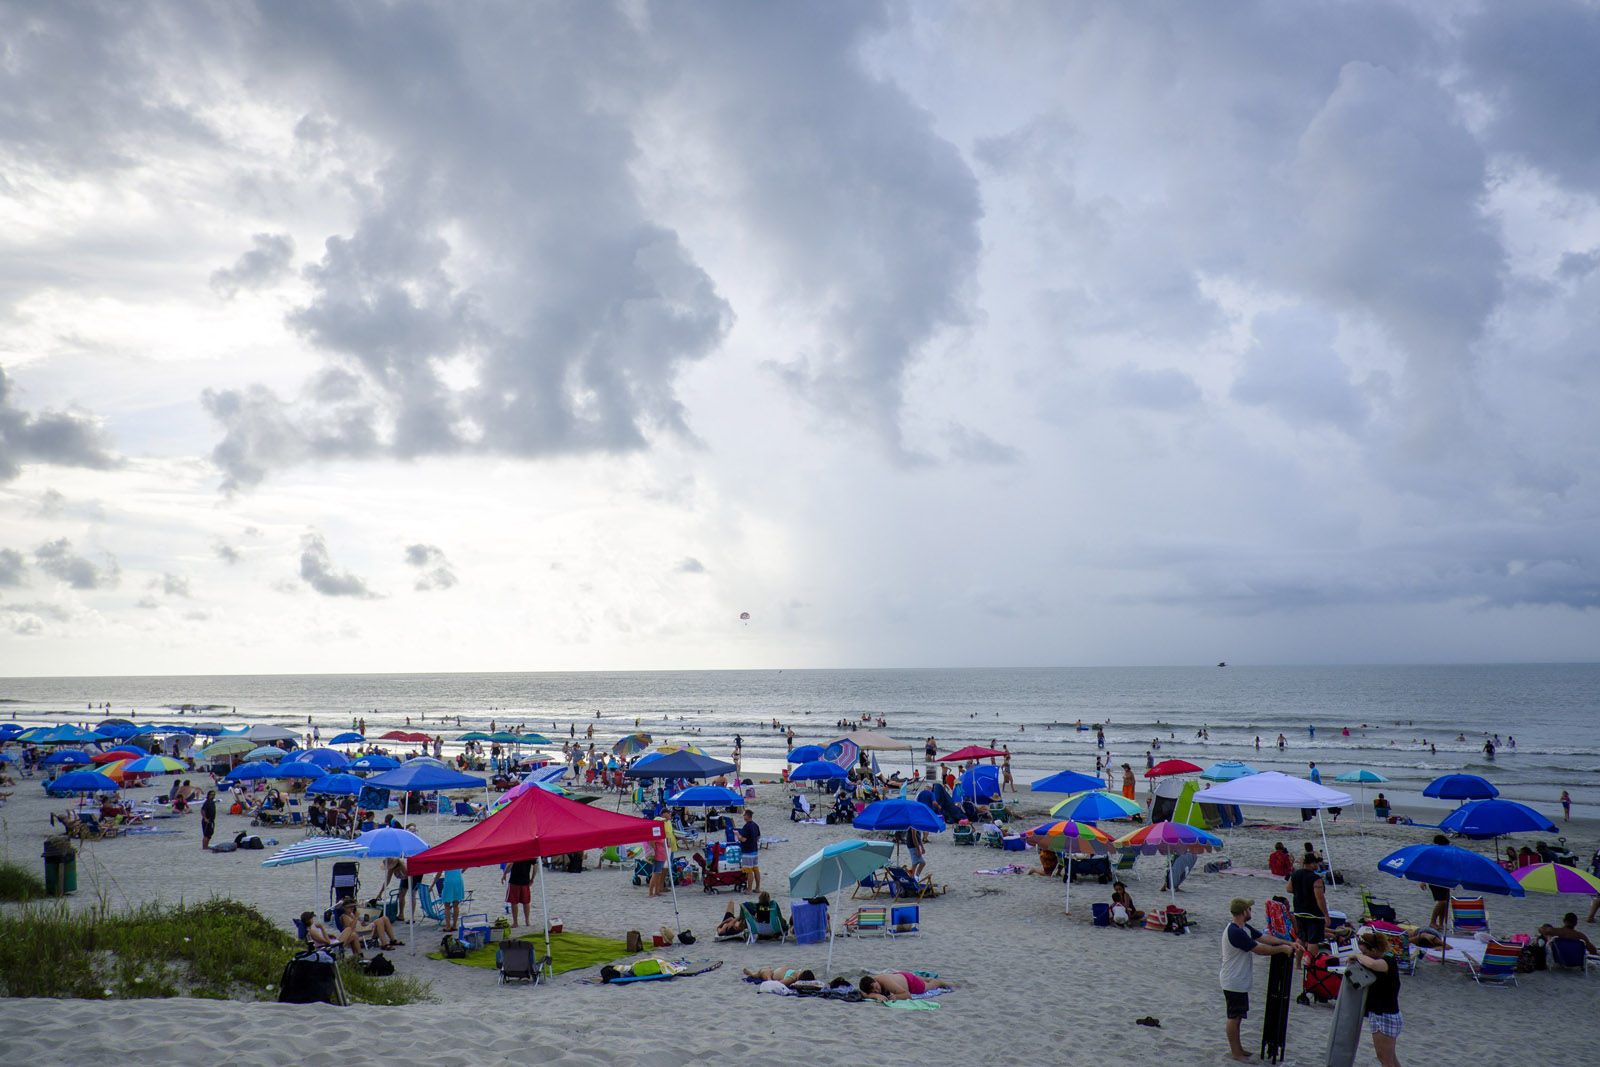 ISLE OF PALMS, SC - AUGUST 21:  Solar eclipse watchers on the beach hoping to view the total solar eclipse if the weather clears on August 21, 2017 in Isle of Palms, South Carolina. It's been 99 years since a total solar eclipse crossed the country from the Pacific to the Atlantic. Millions of people have flocked to areas of the U.S. that are in the "path of totality" in order to experience a total solar eclipse. During the event, the moon will pass in between the sun and the Earth, appearing to block the sun. Isle of Palms is one of last vantage points where totality will be visible. (Photo by Pete Marovich/Getty Images)